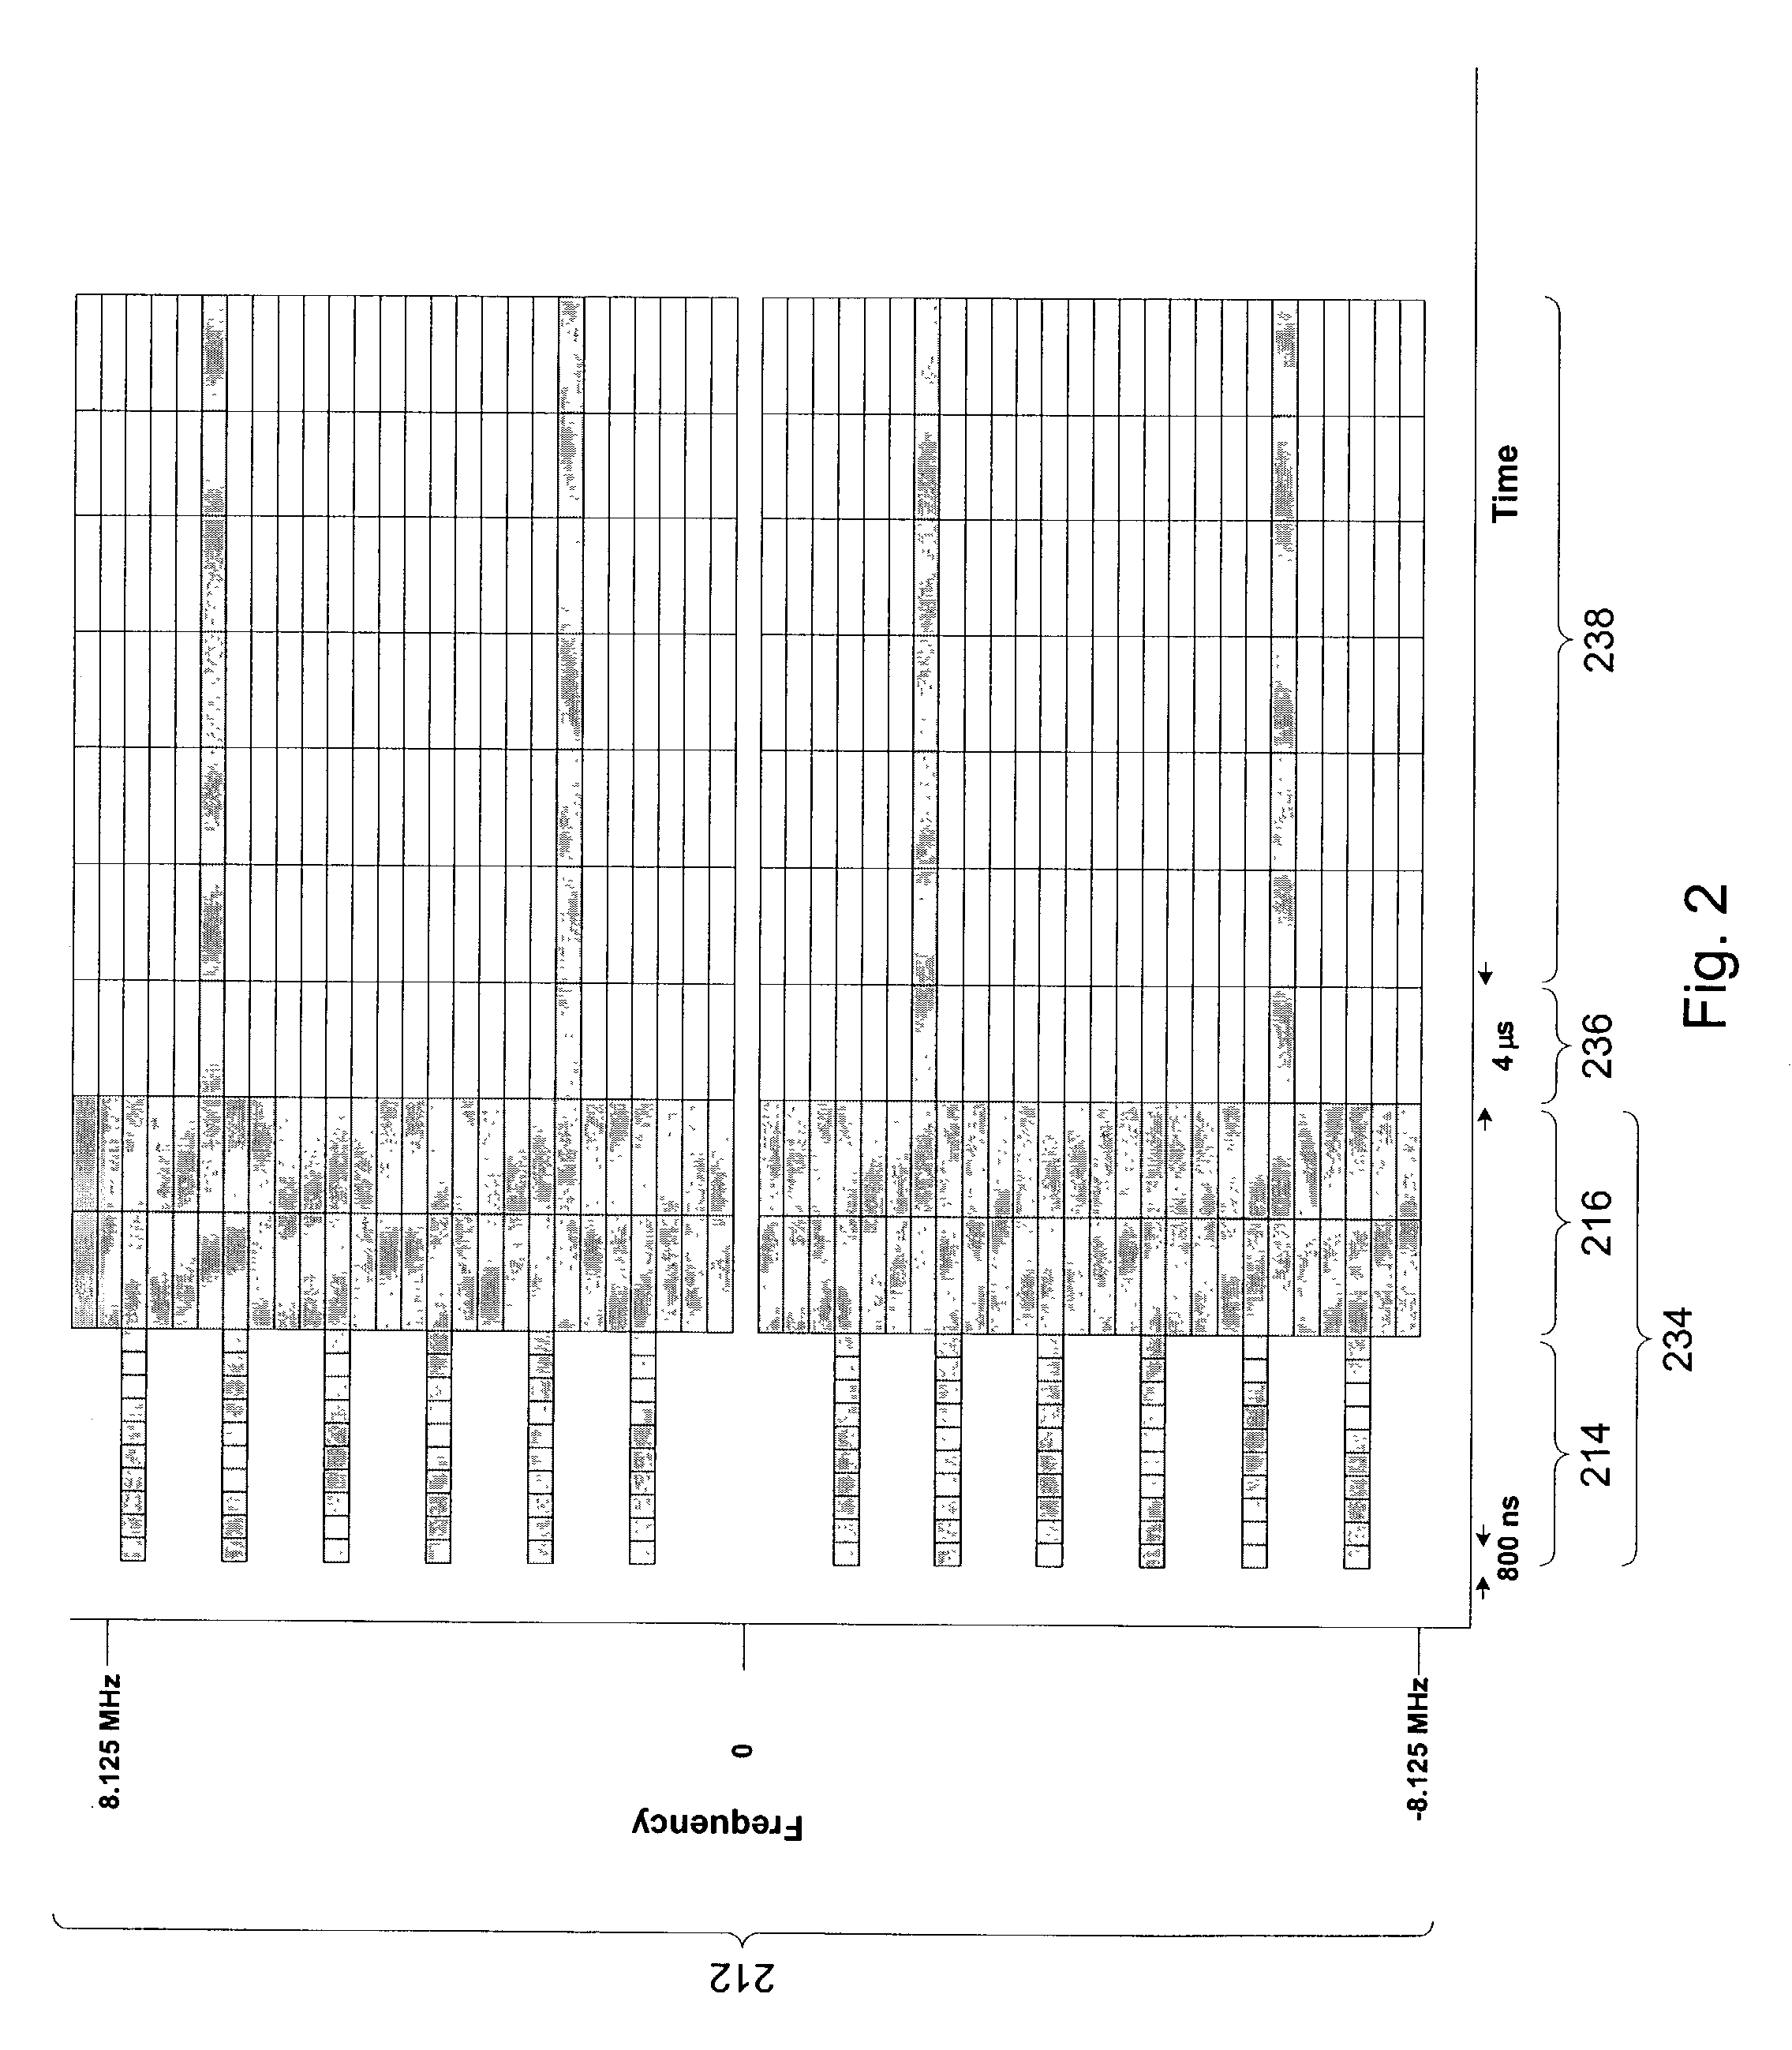 Robust OFDM carrier recovery methods and apparatus